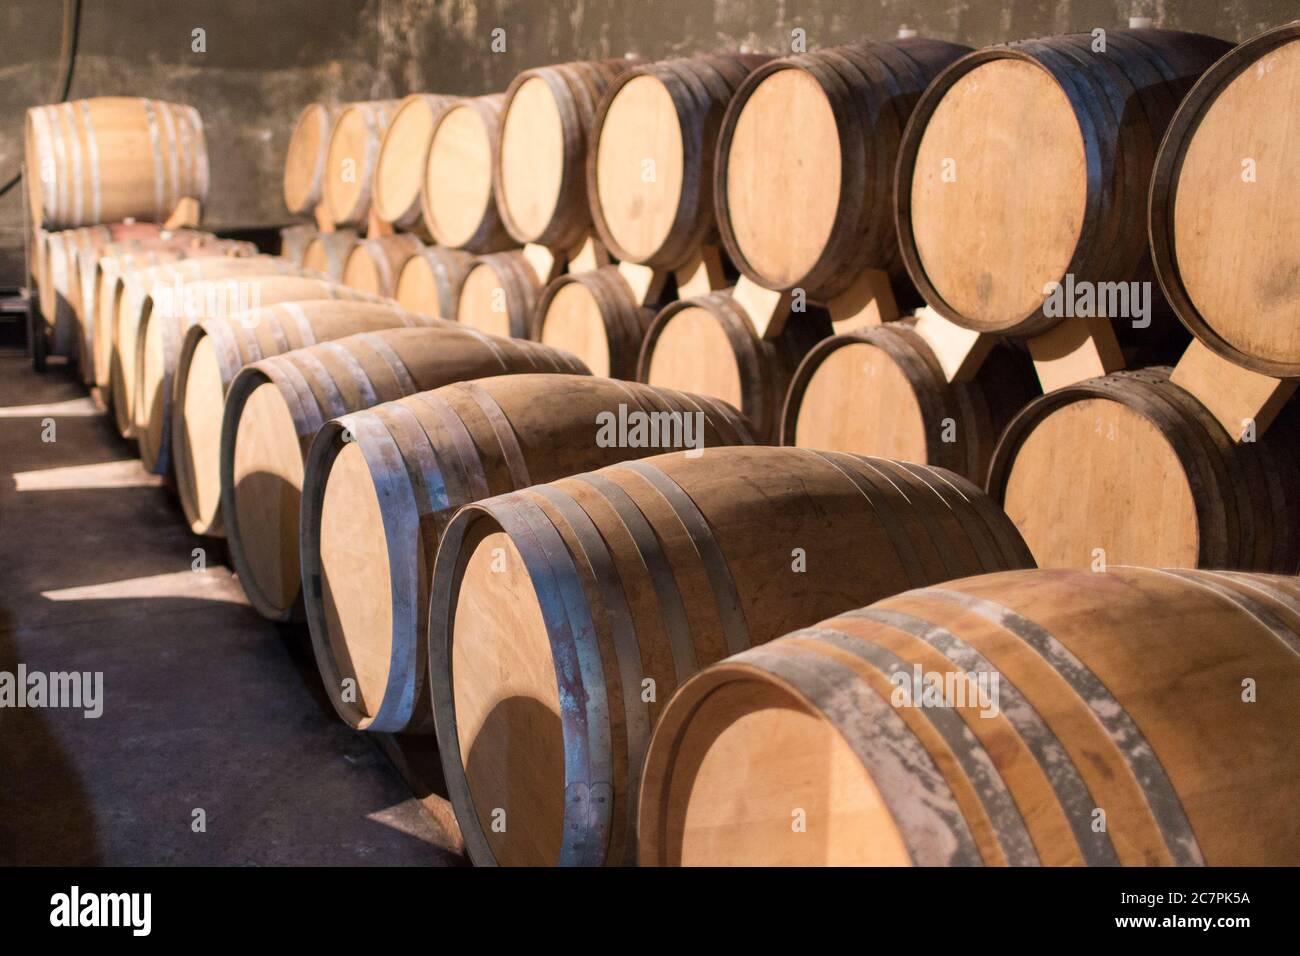 Barrels and bottles ready for export at the Hin Areni Vineyard, a few hours south of Yerevan in Armenia. Stock Photo